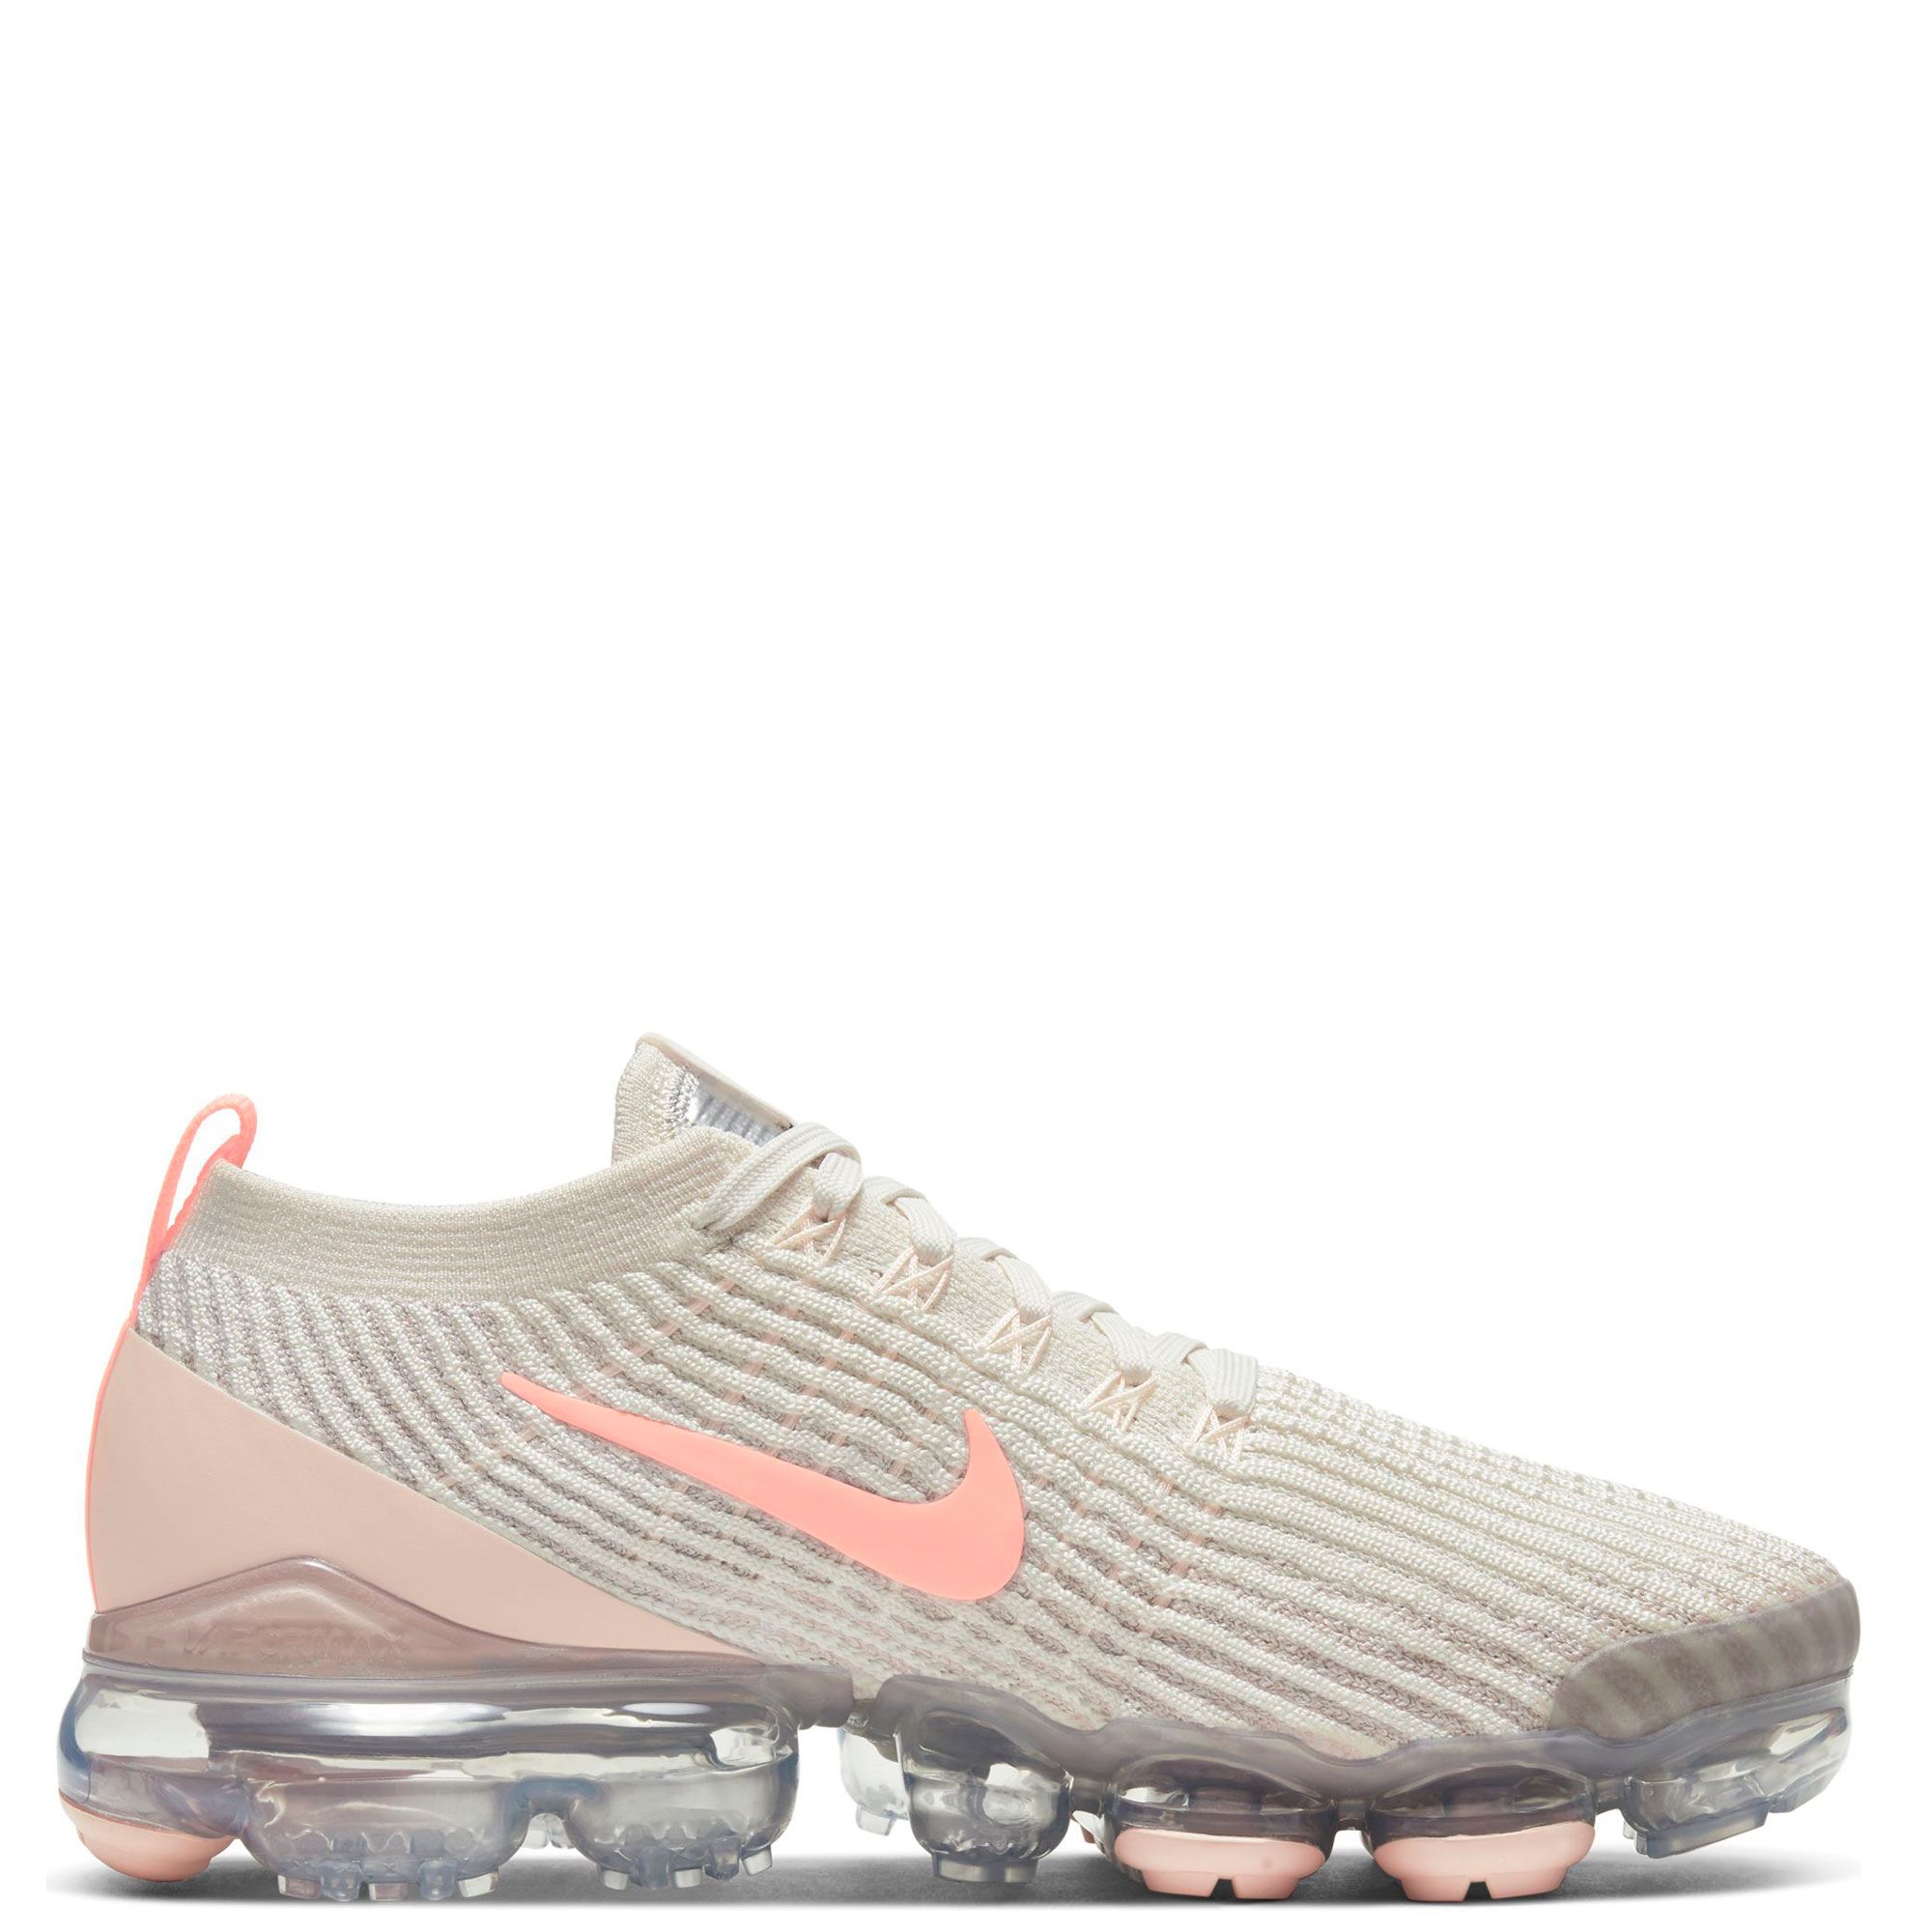 vapormax flyknit 3 cream and pink